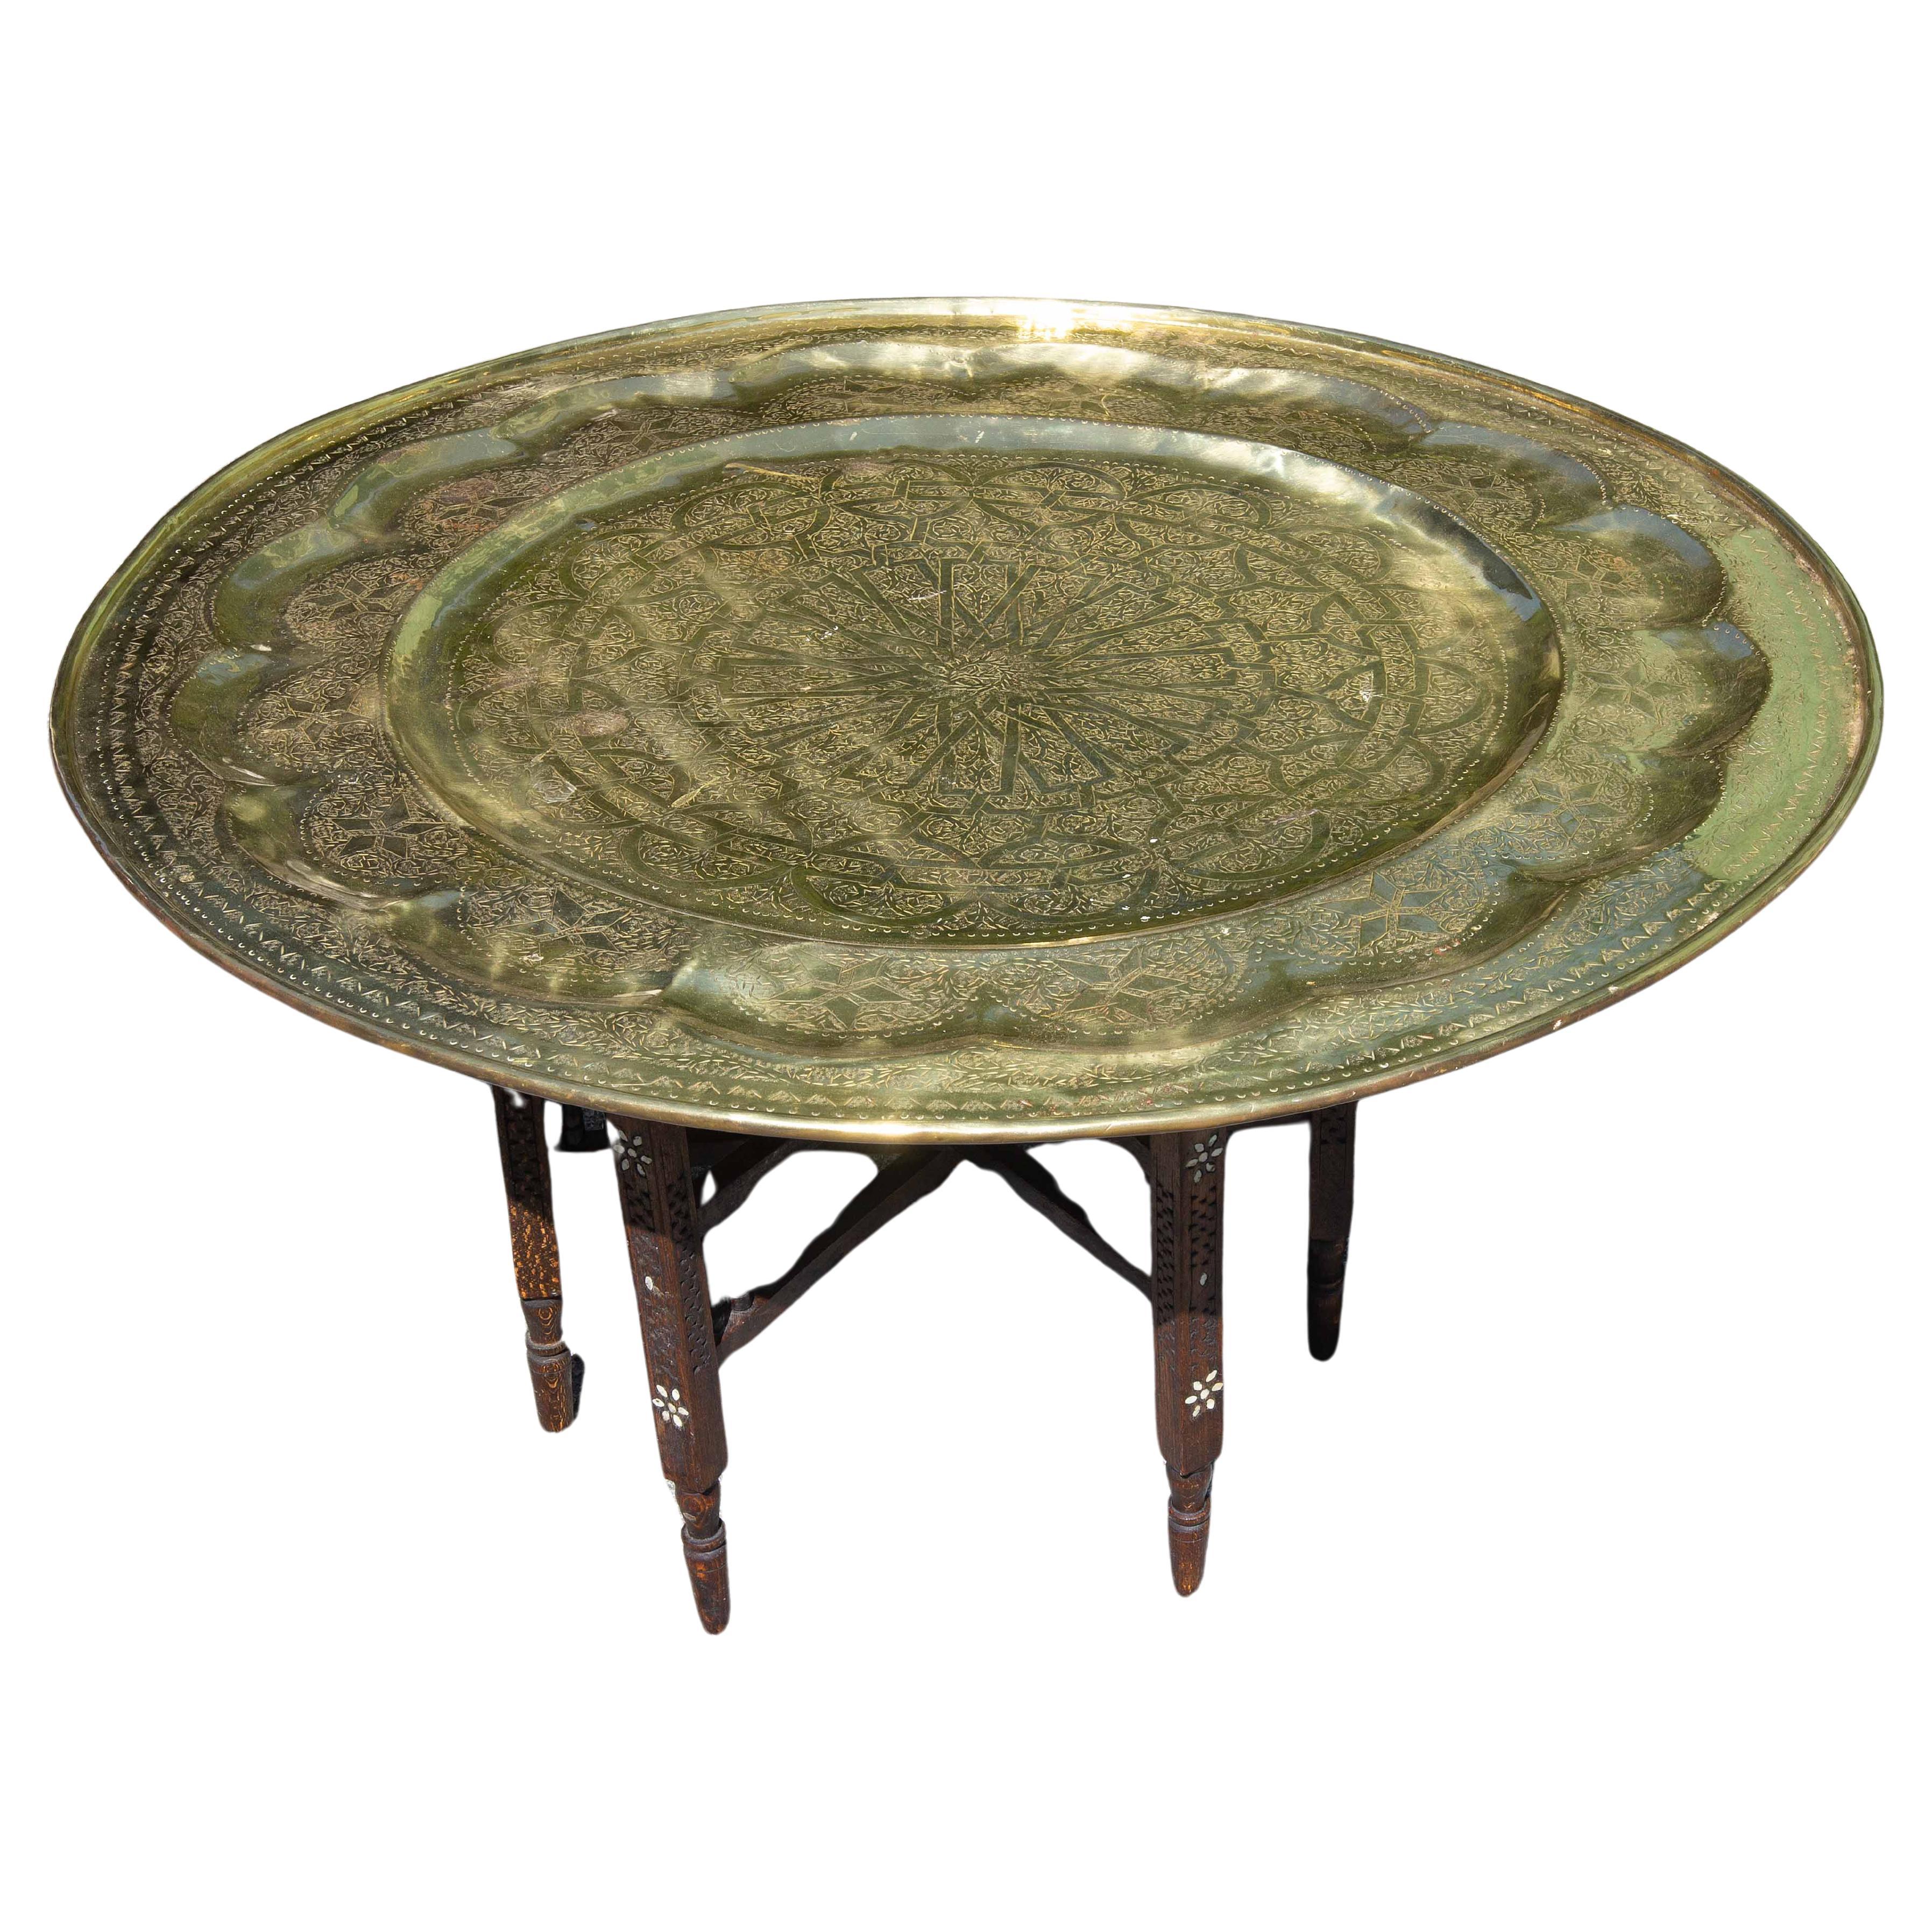 Brass tray top table with carved and inlaid folding stand. Tray engraved with Arabic designs. 